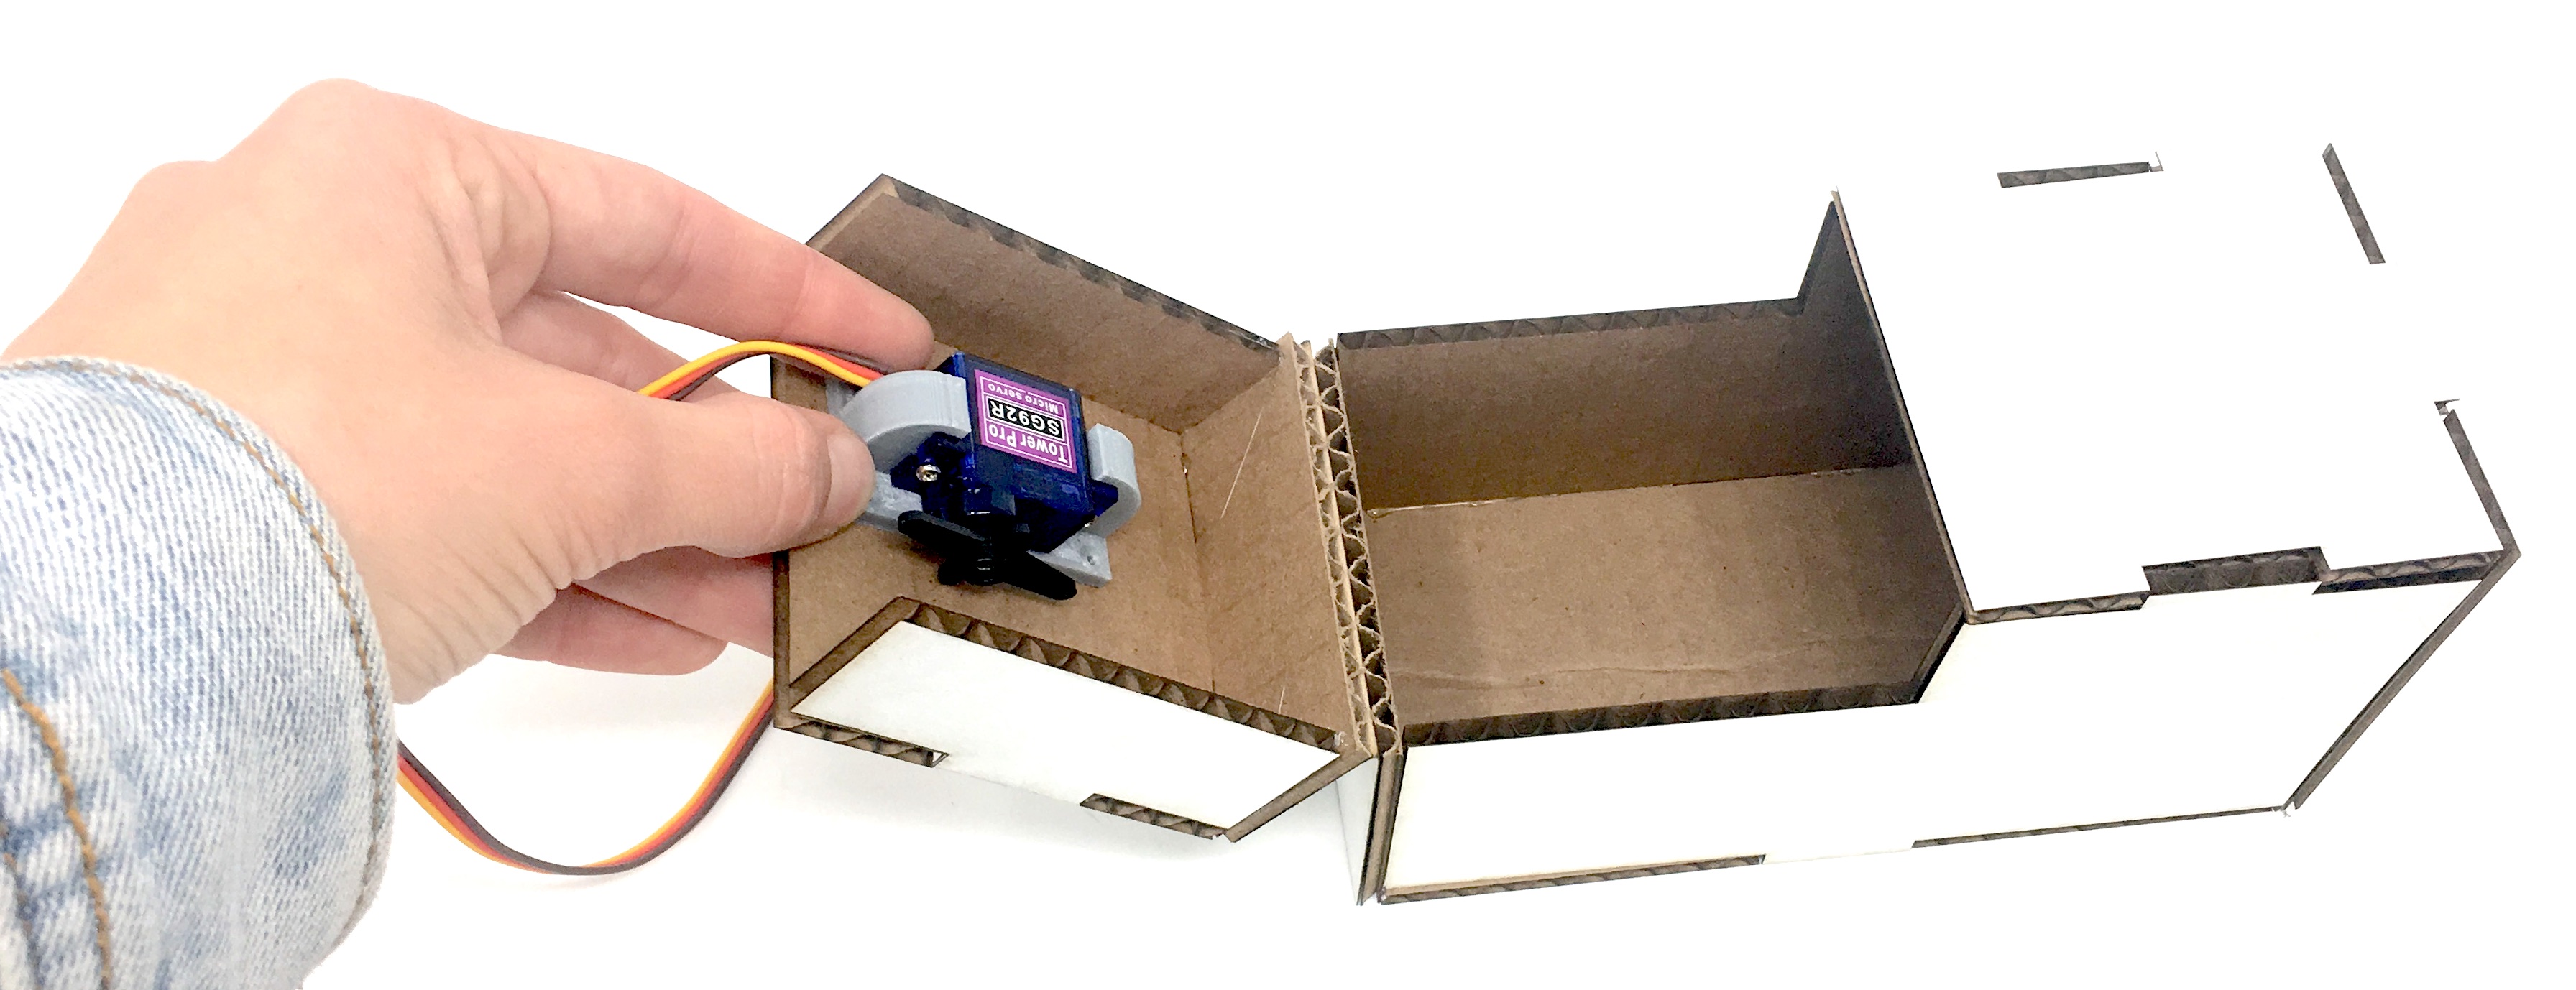 Laser cut box with Andrea holding servo on 3D-printed mount on the moving side of the box. Where should the Arduino be mounted?